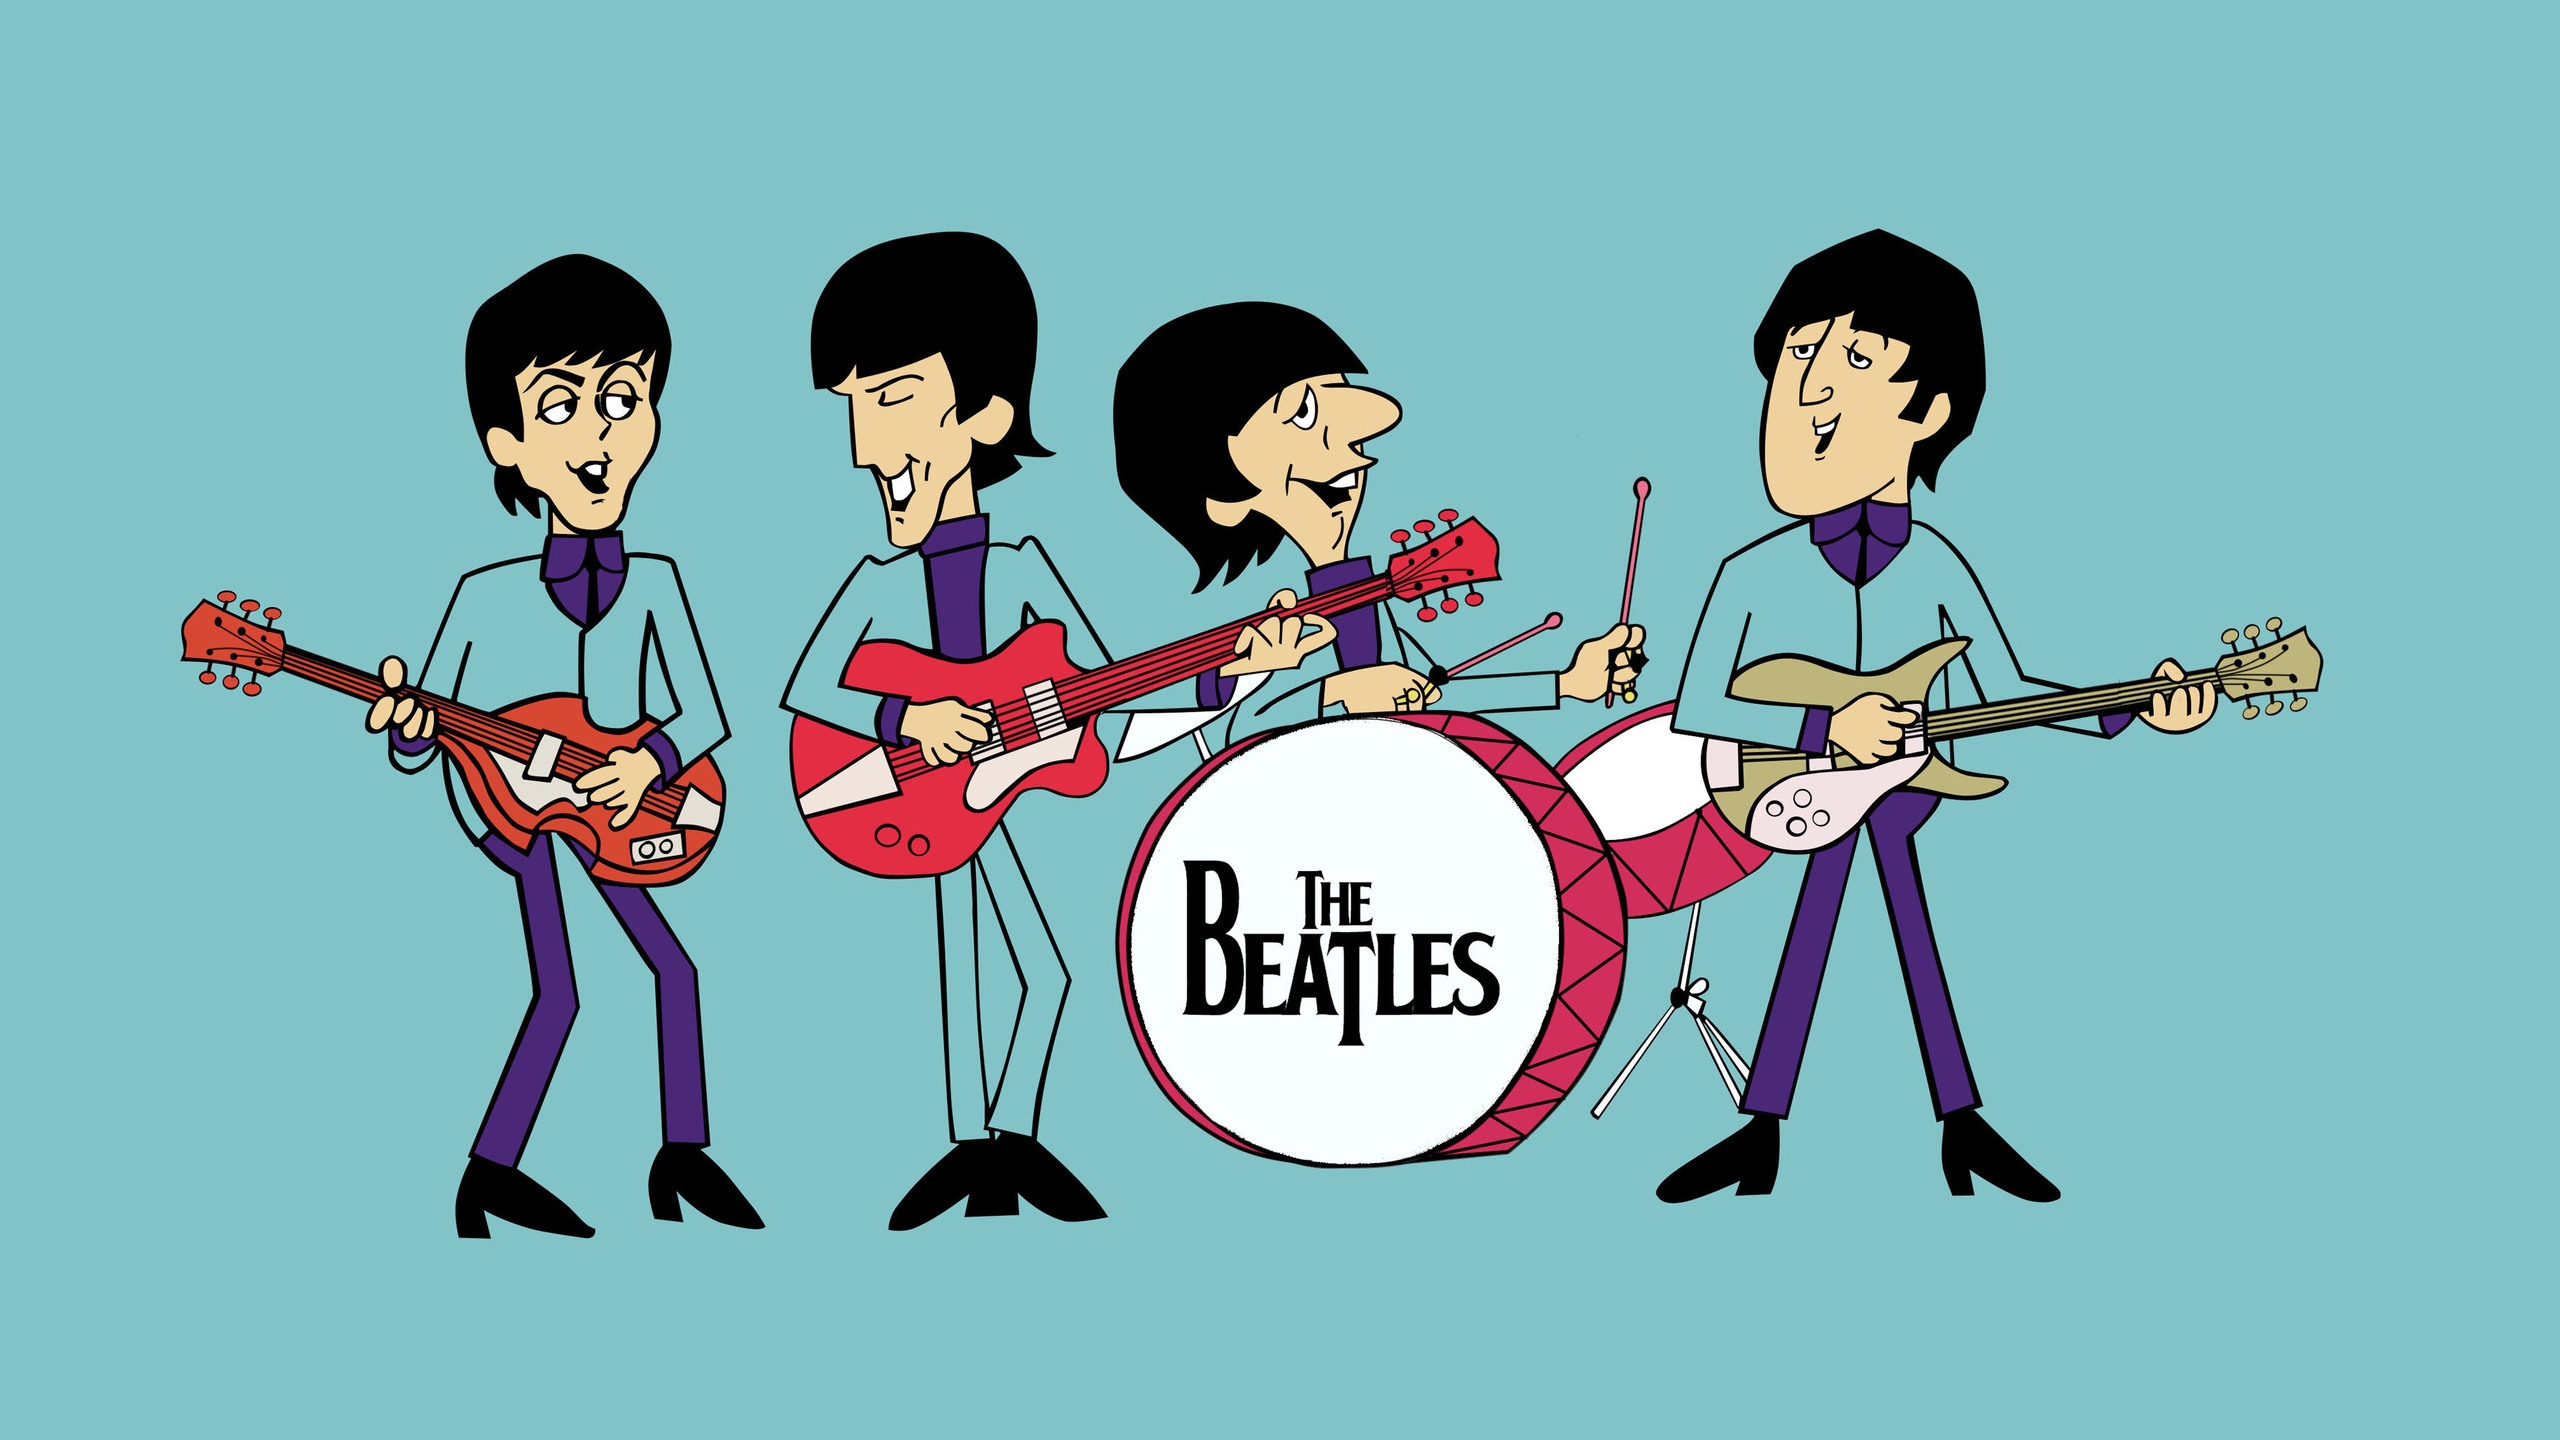 The Beatles Comics for 2560x1440 HDTV resolution